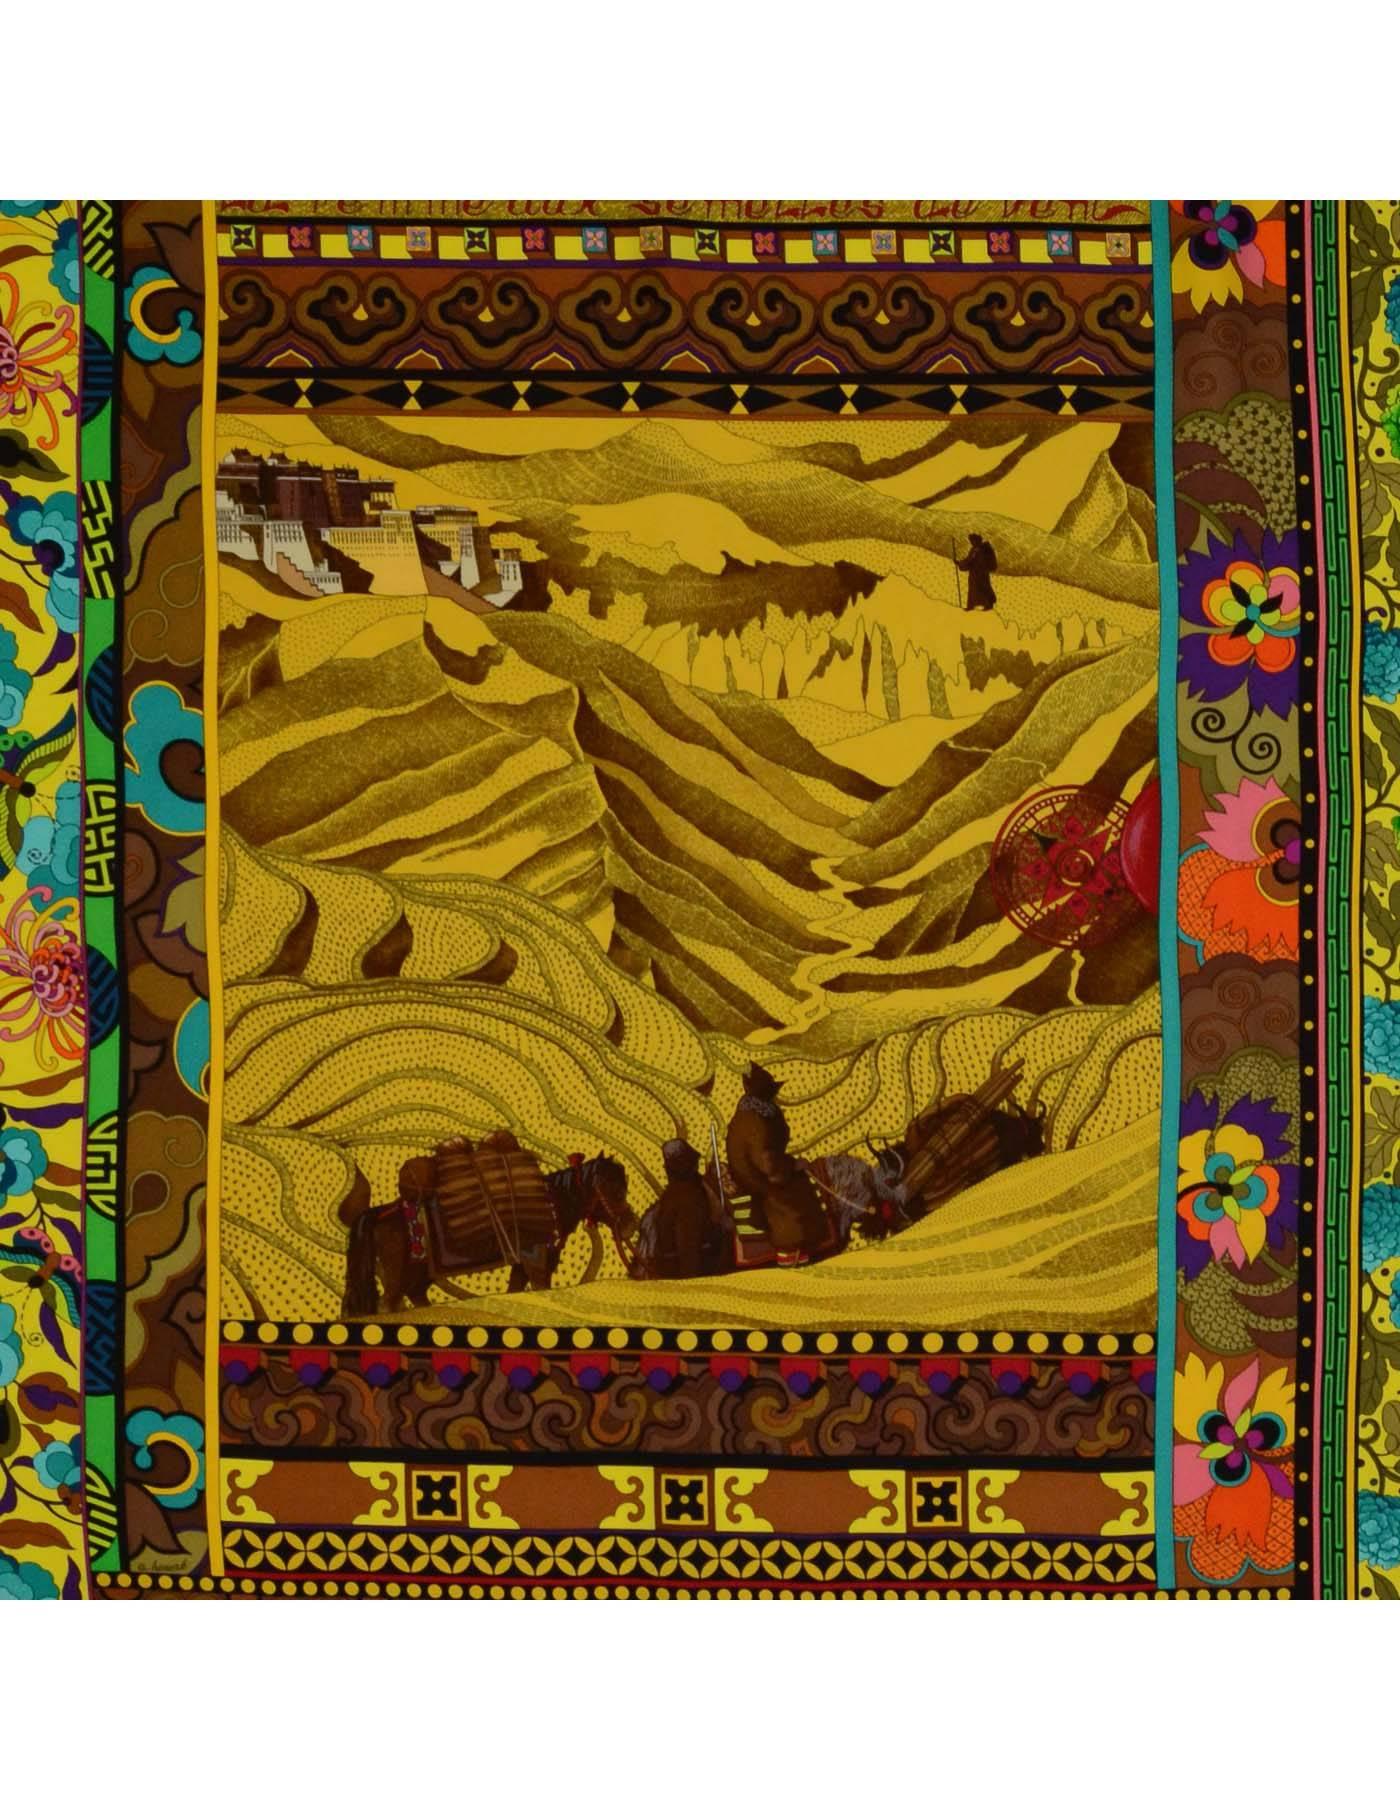 Hermes Multicolor 'La Femme aux Semelles de Vent' Silk 90cm Scarf
Features center picture of travelers surrounded by multiple abstract borders

-Made in: France
-Color: Multi-colored.
-Composition: 100% Silk
-Includes: Hermes box
-Overall